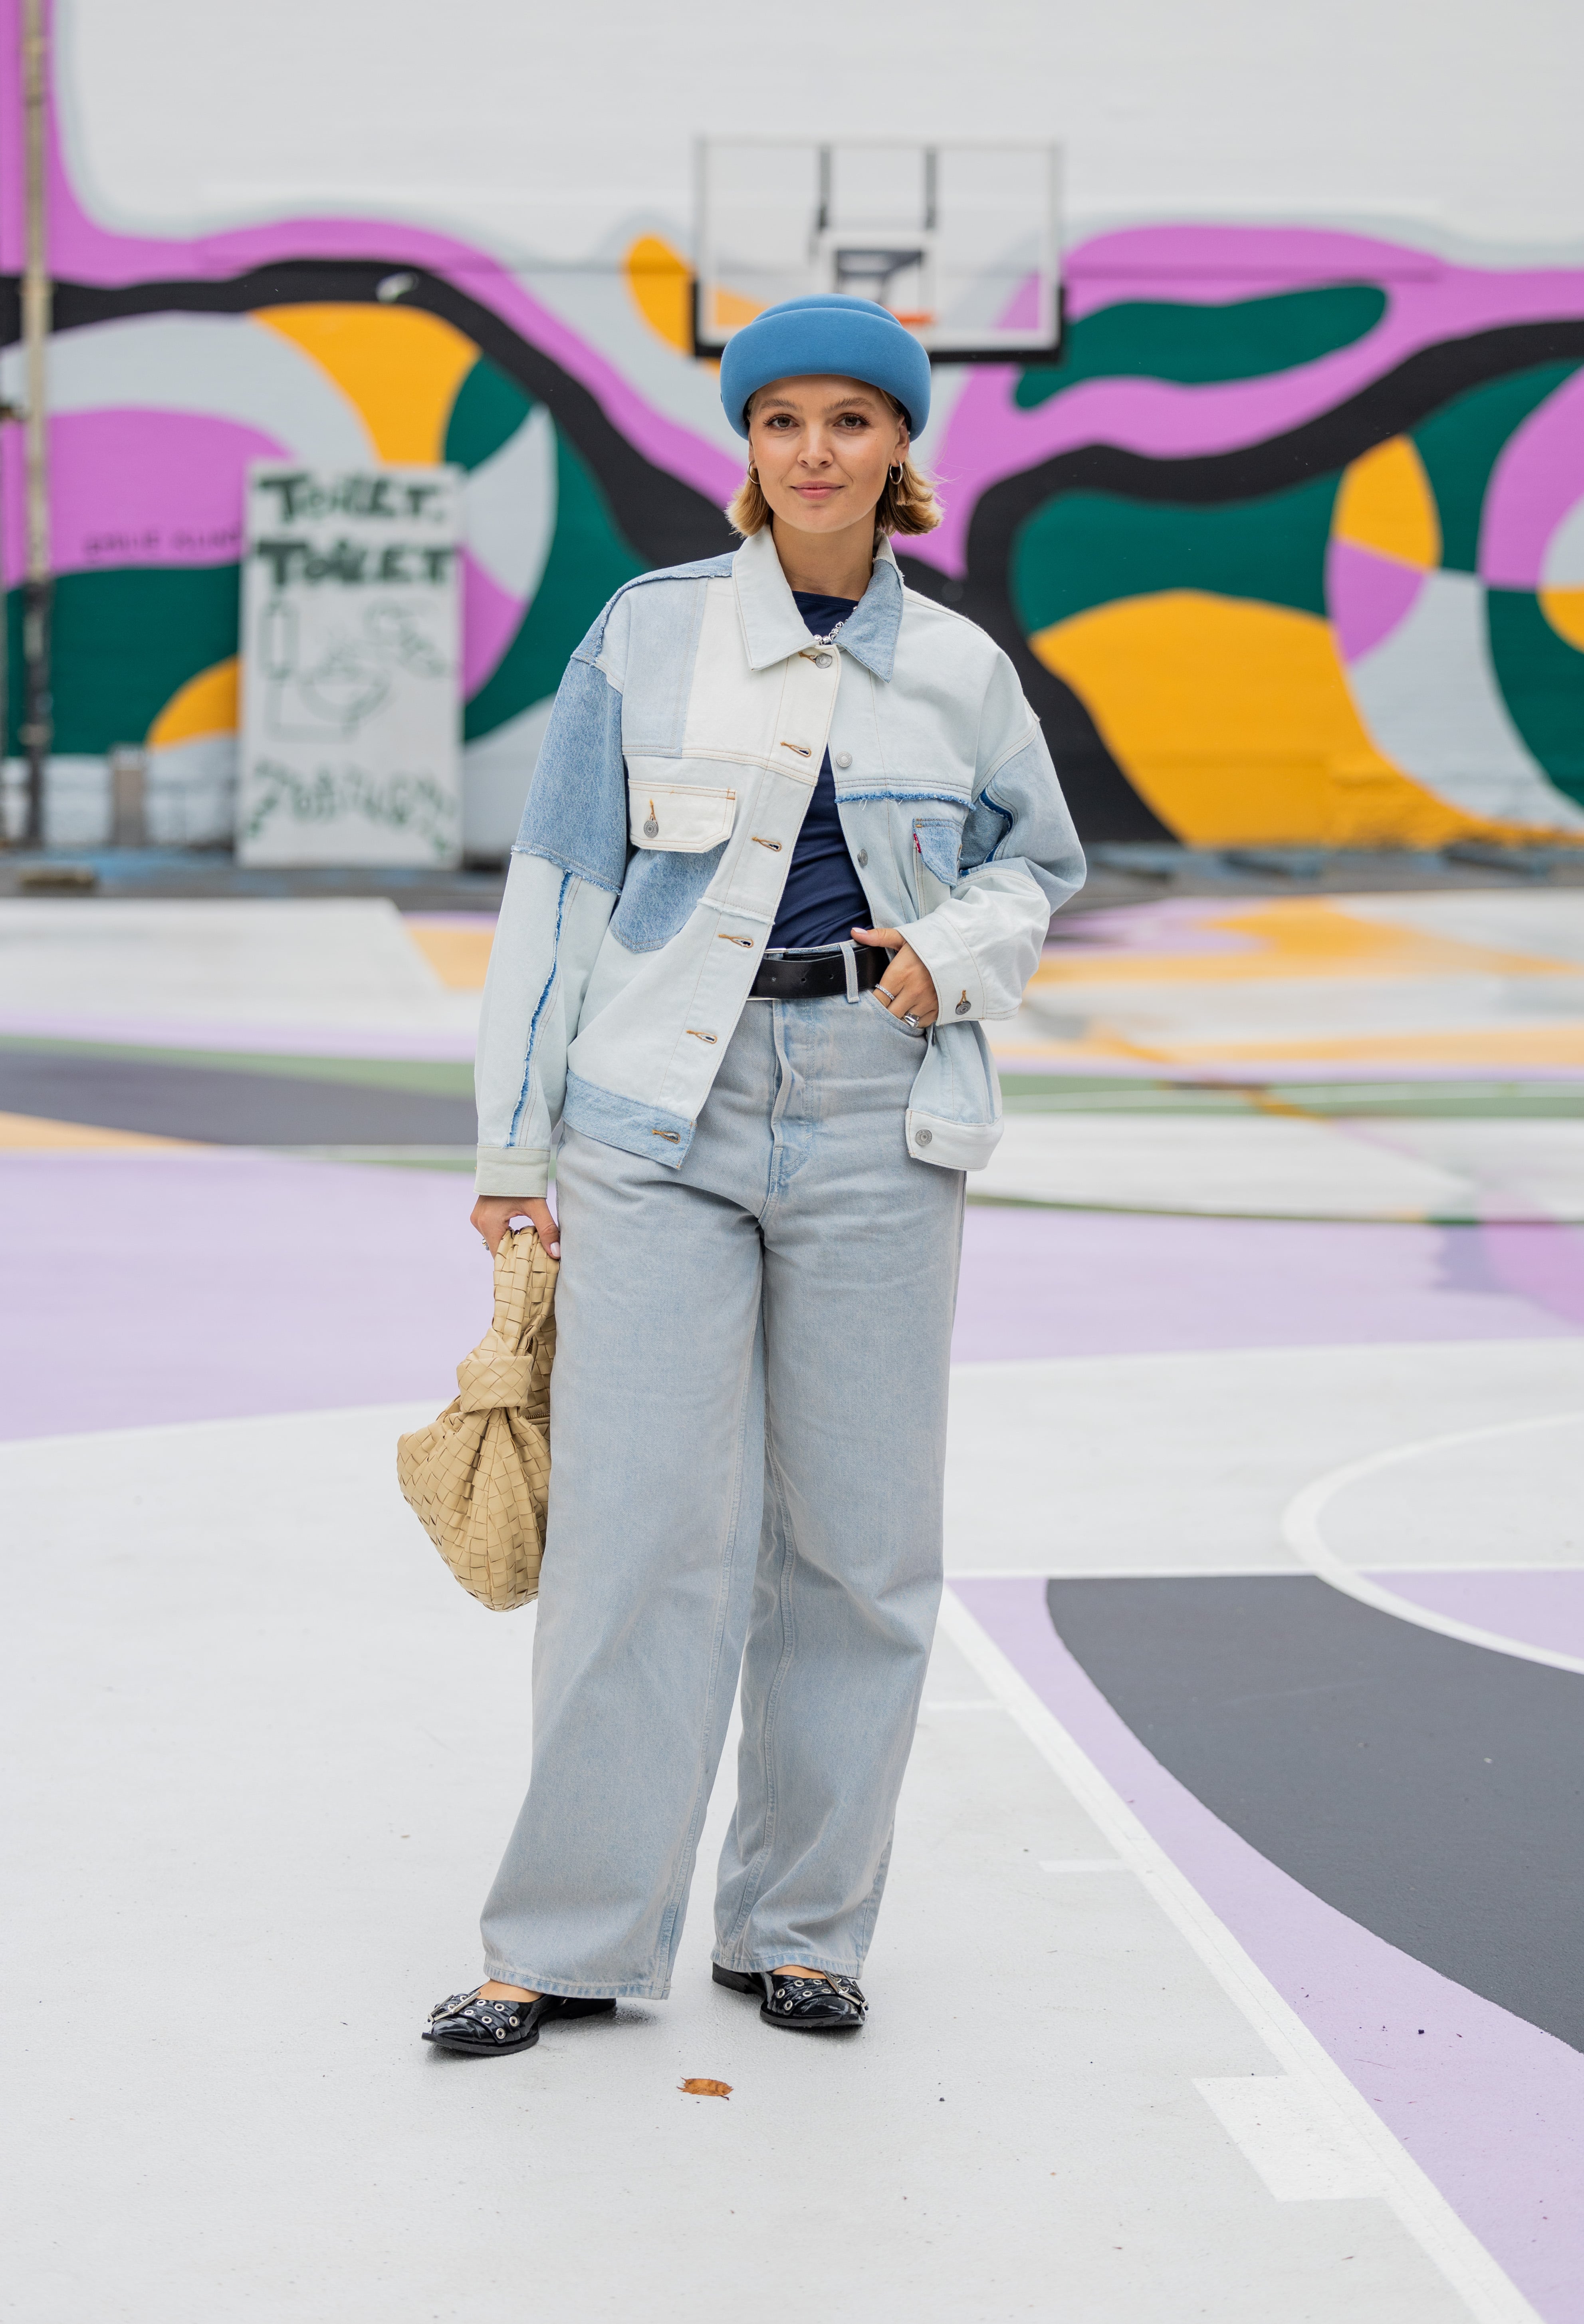 Best Of: Street style at New York Fashion Week